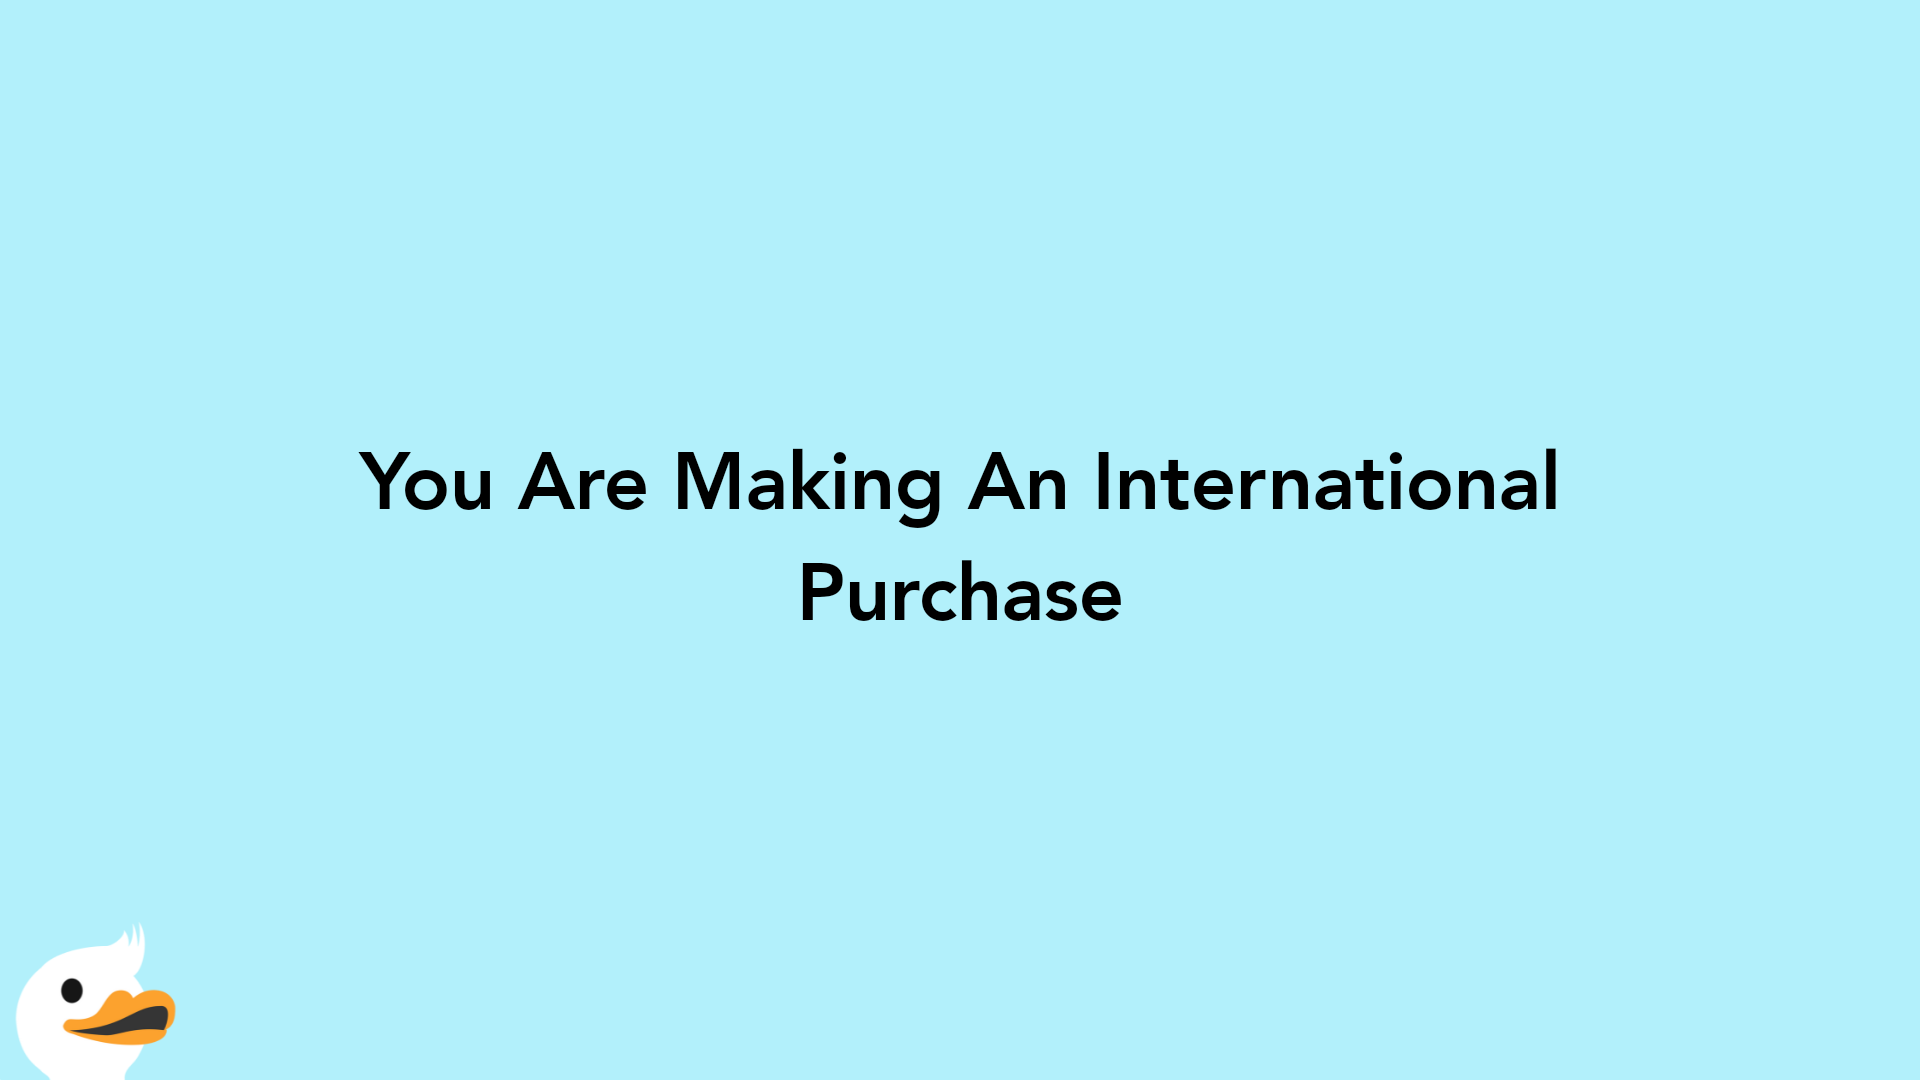 You Are Making An International Purchase